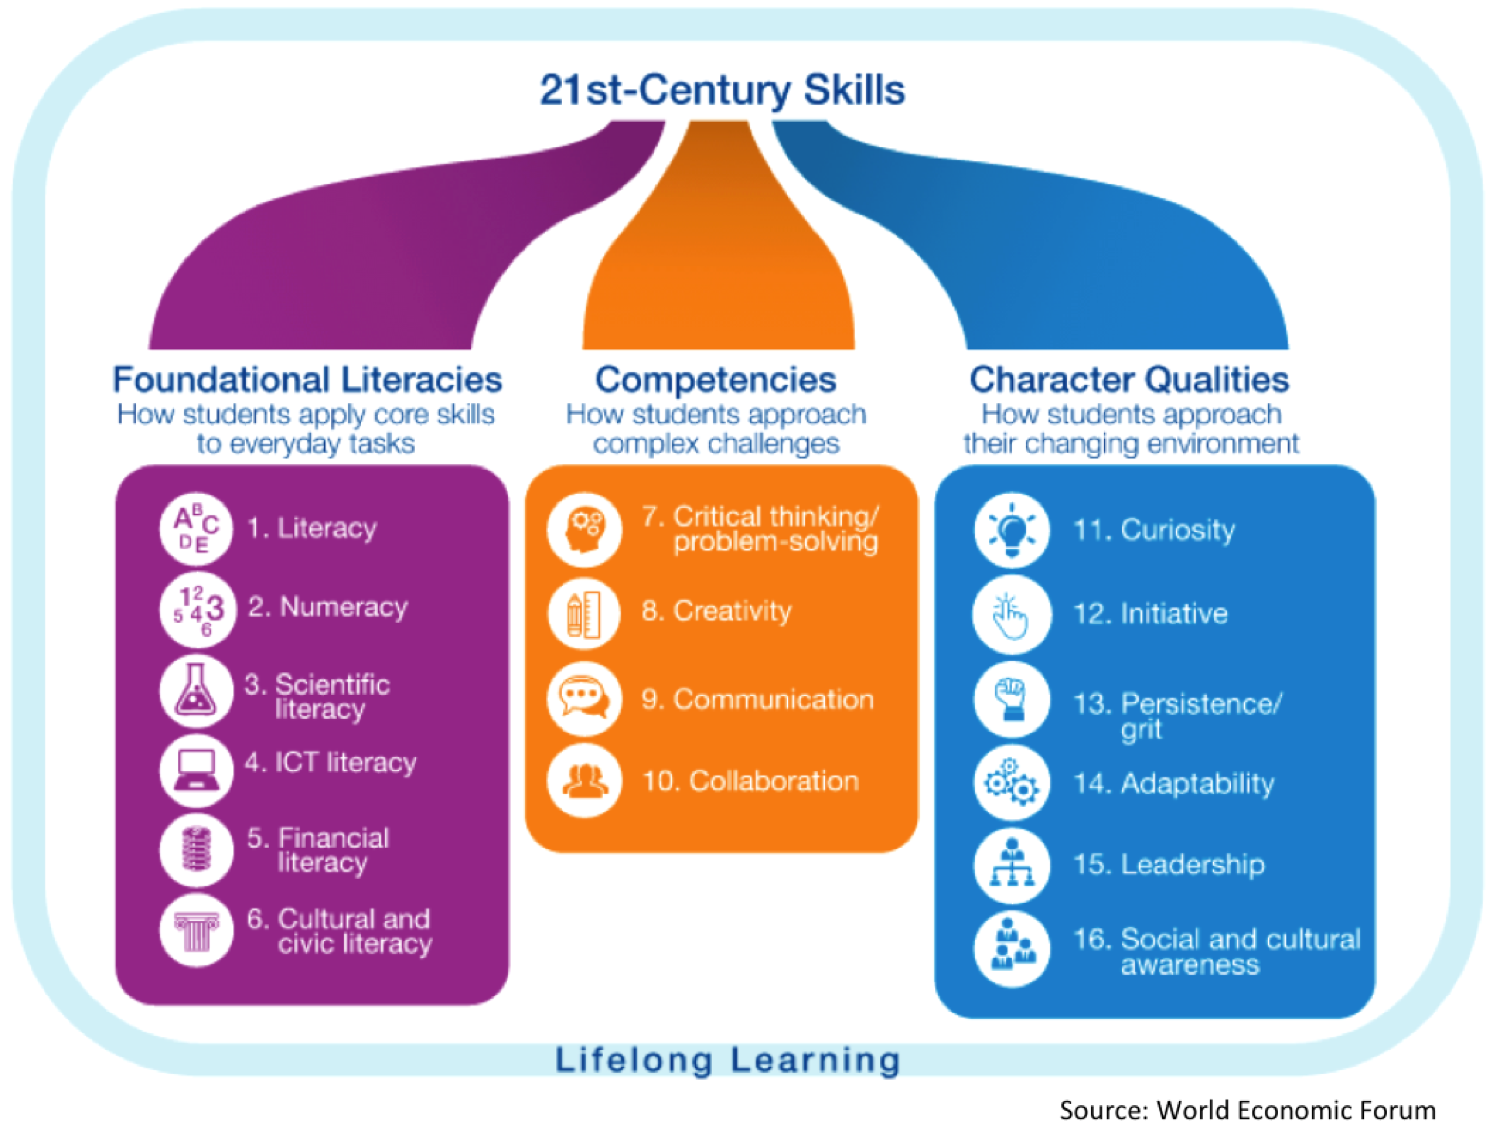 critical thinking as a 21st century skill